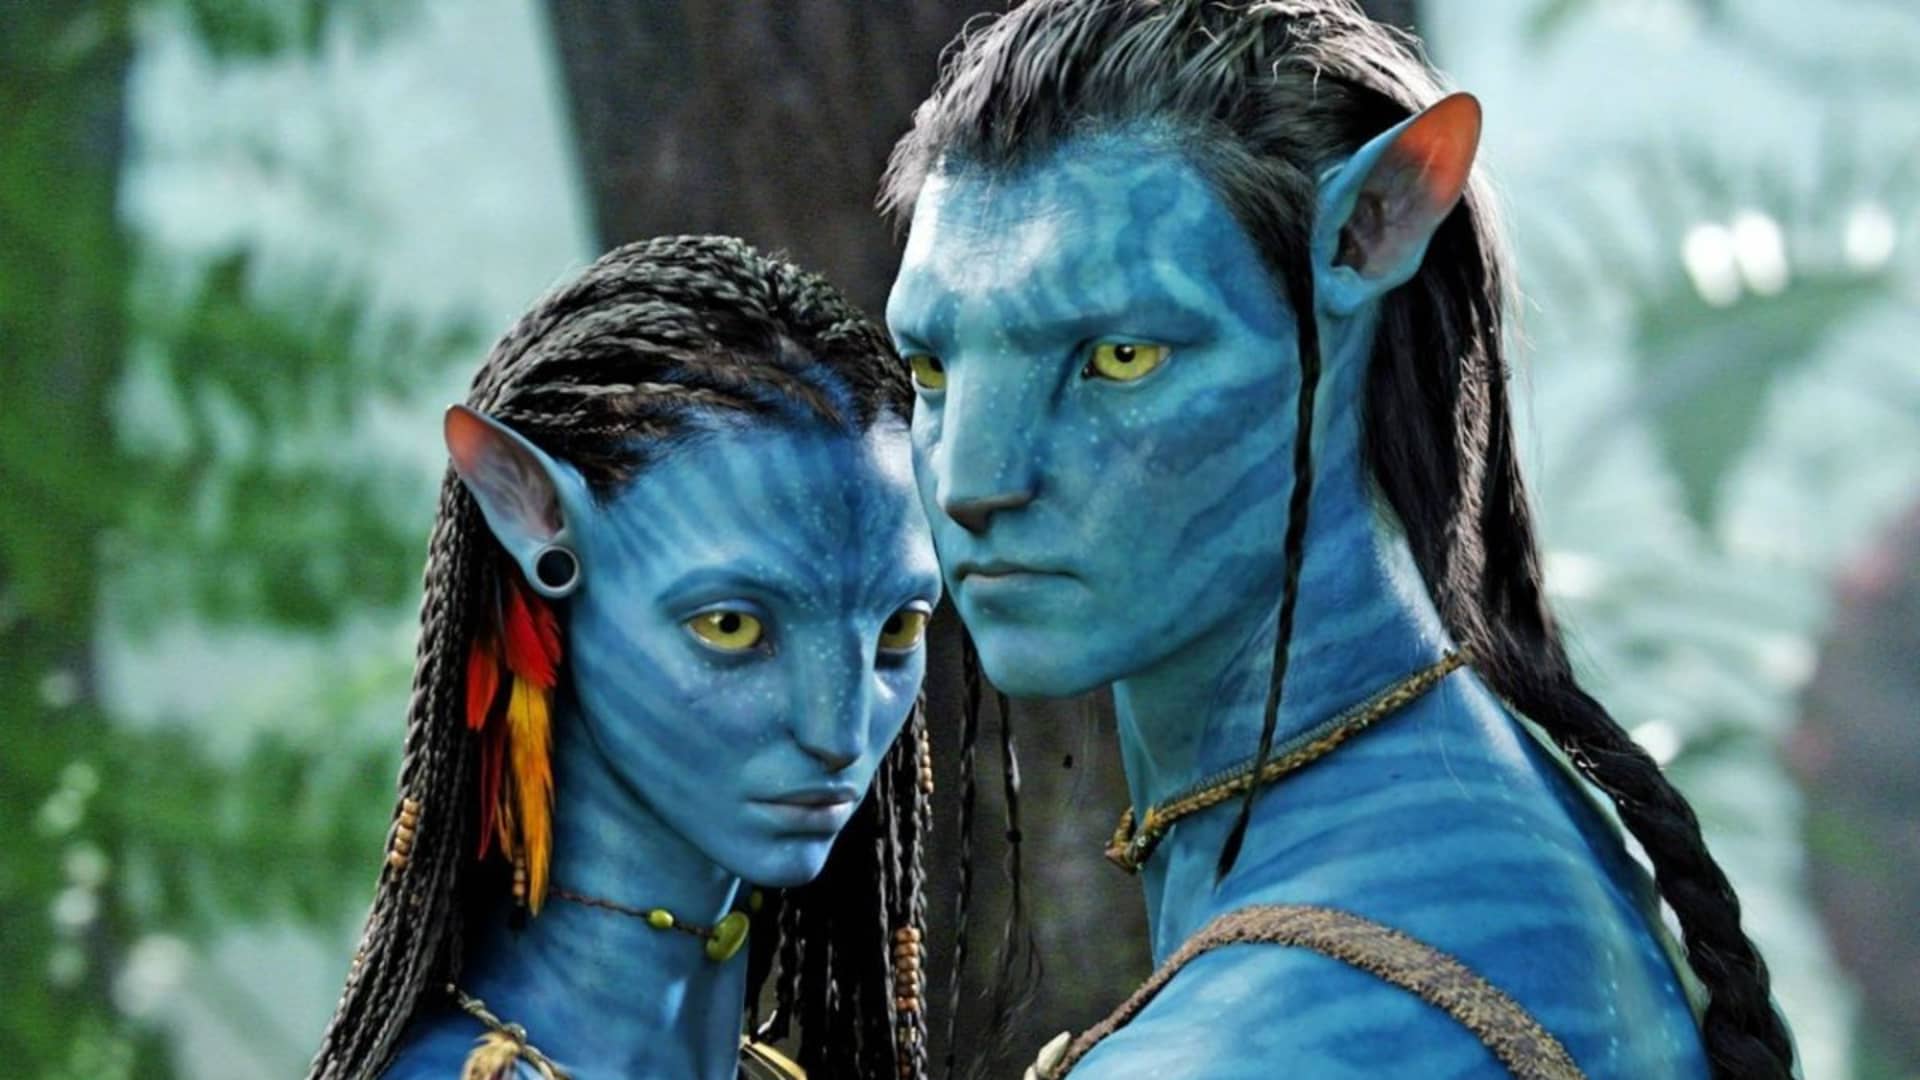 'Avatar' returns to theaters as Disney tries to hype audiences for its long-delayed sequel 